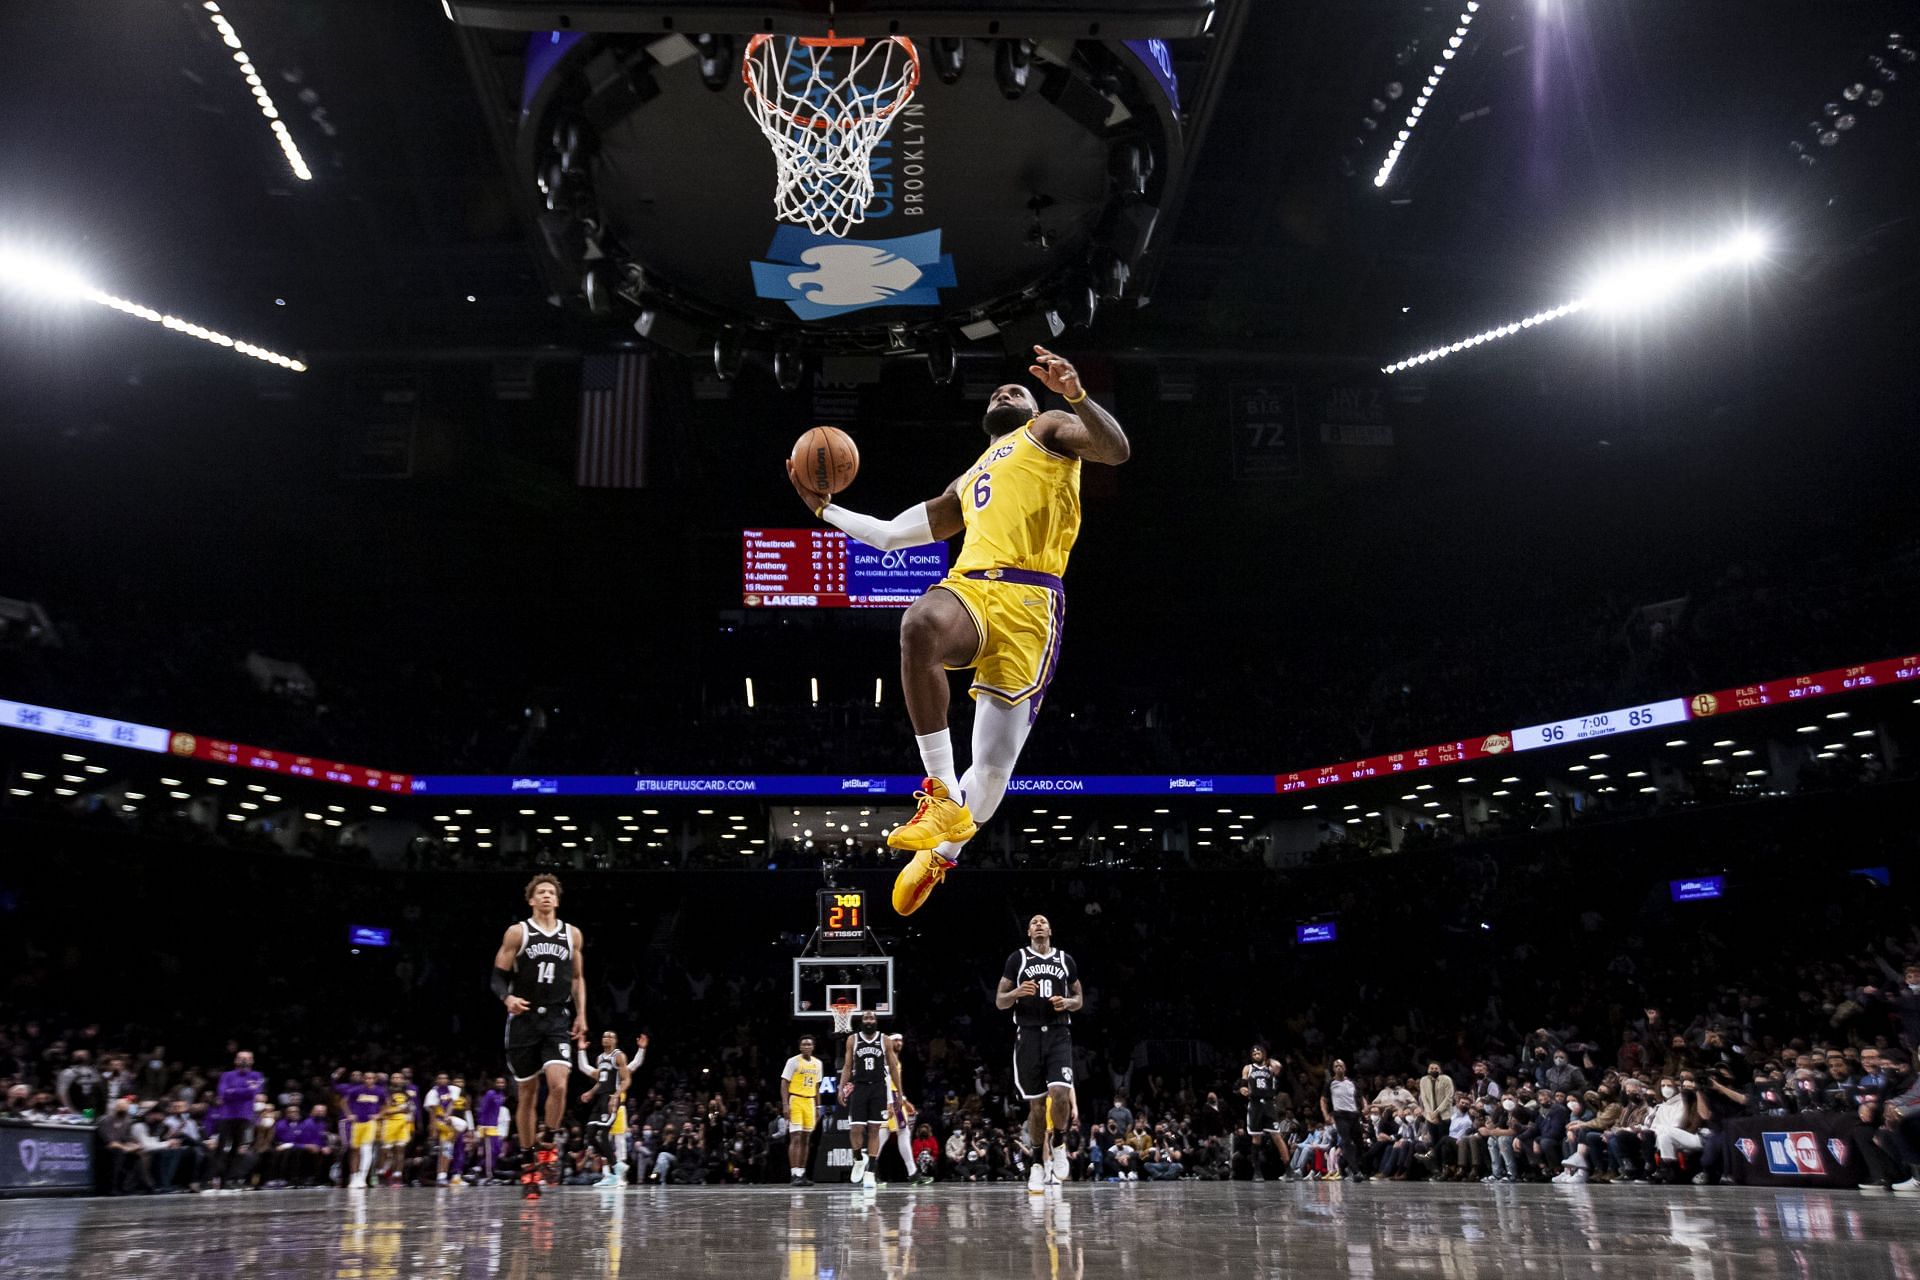 LeBron James dunks the ball in a game against the Brooklyn Nets